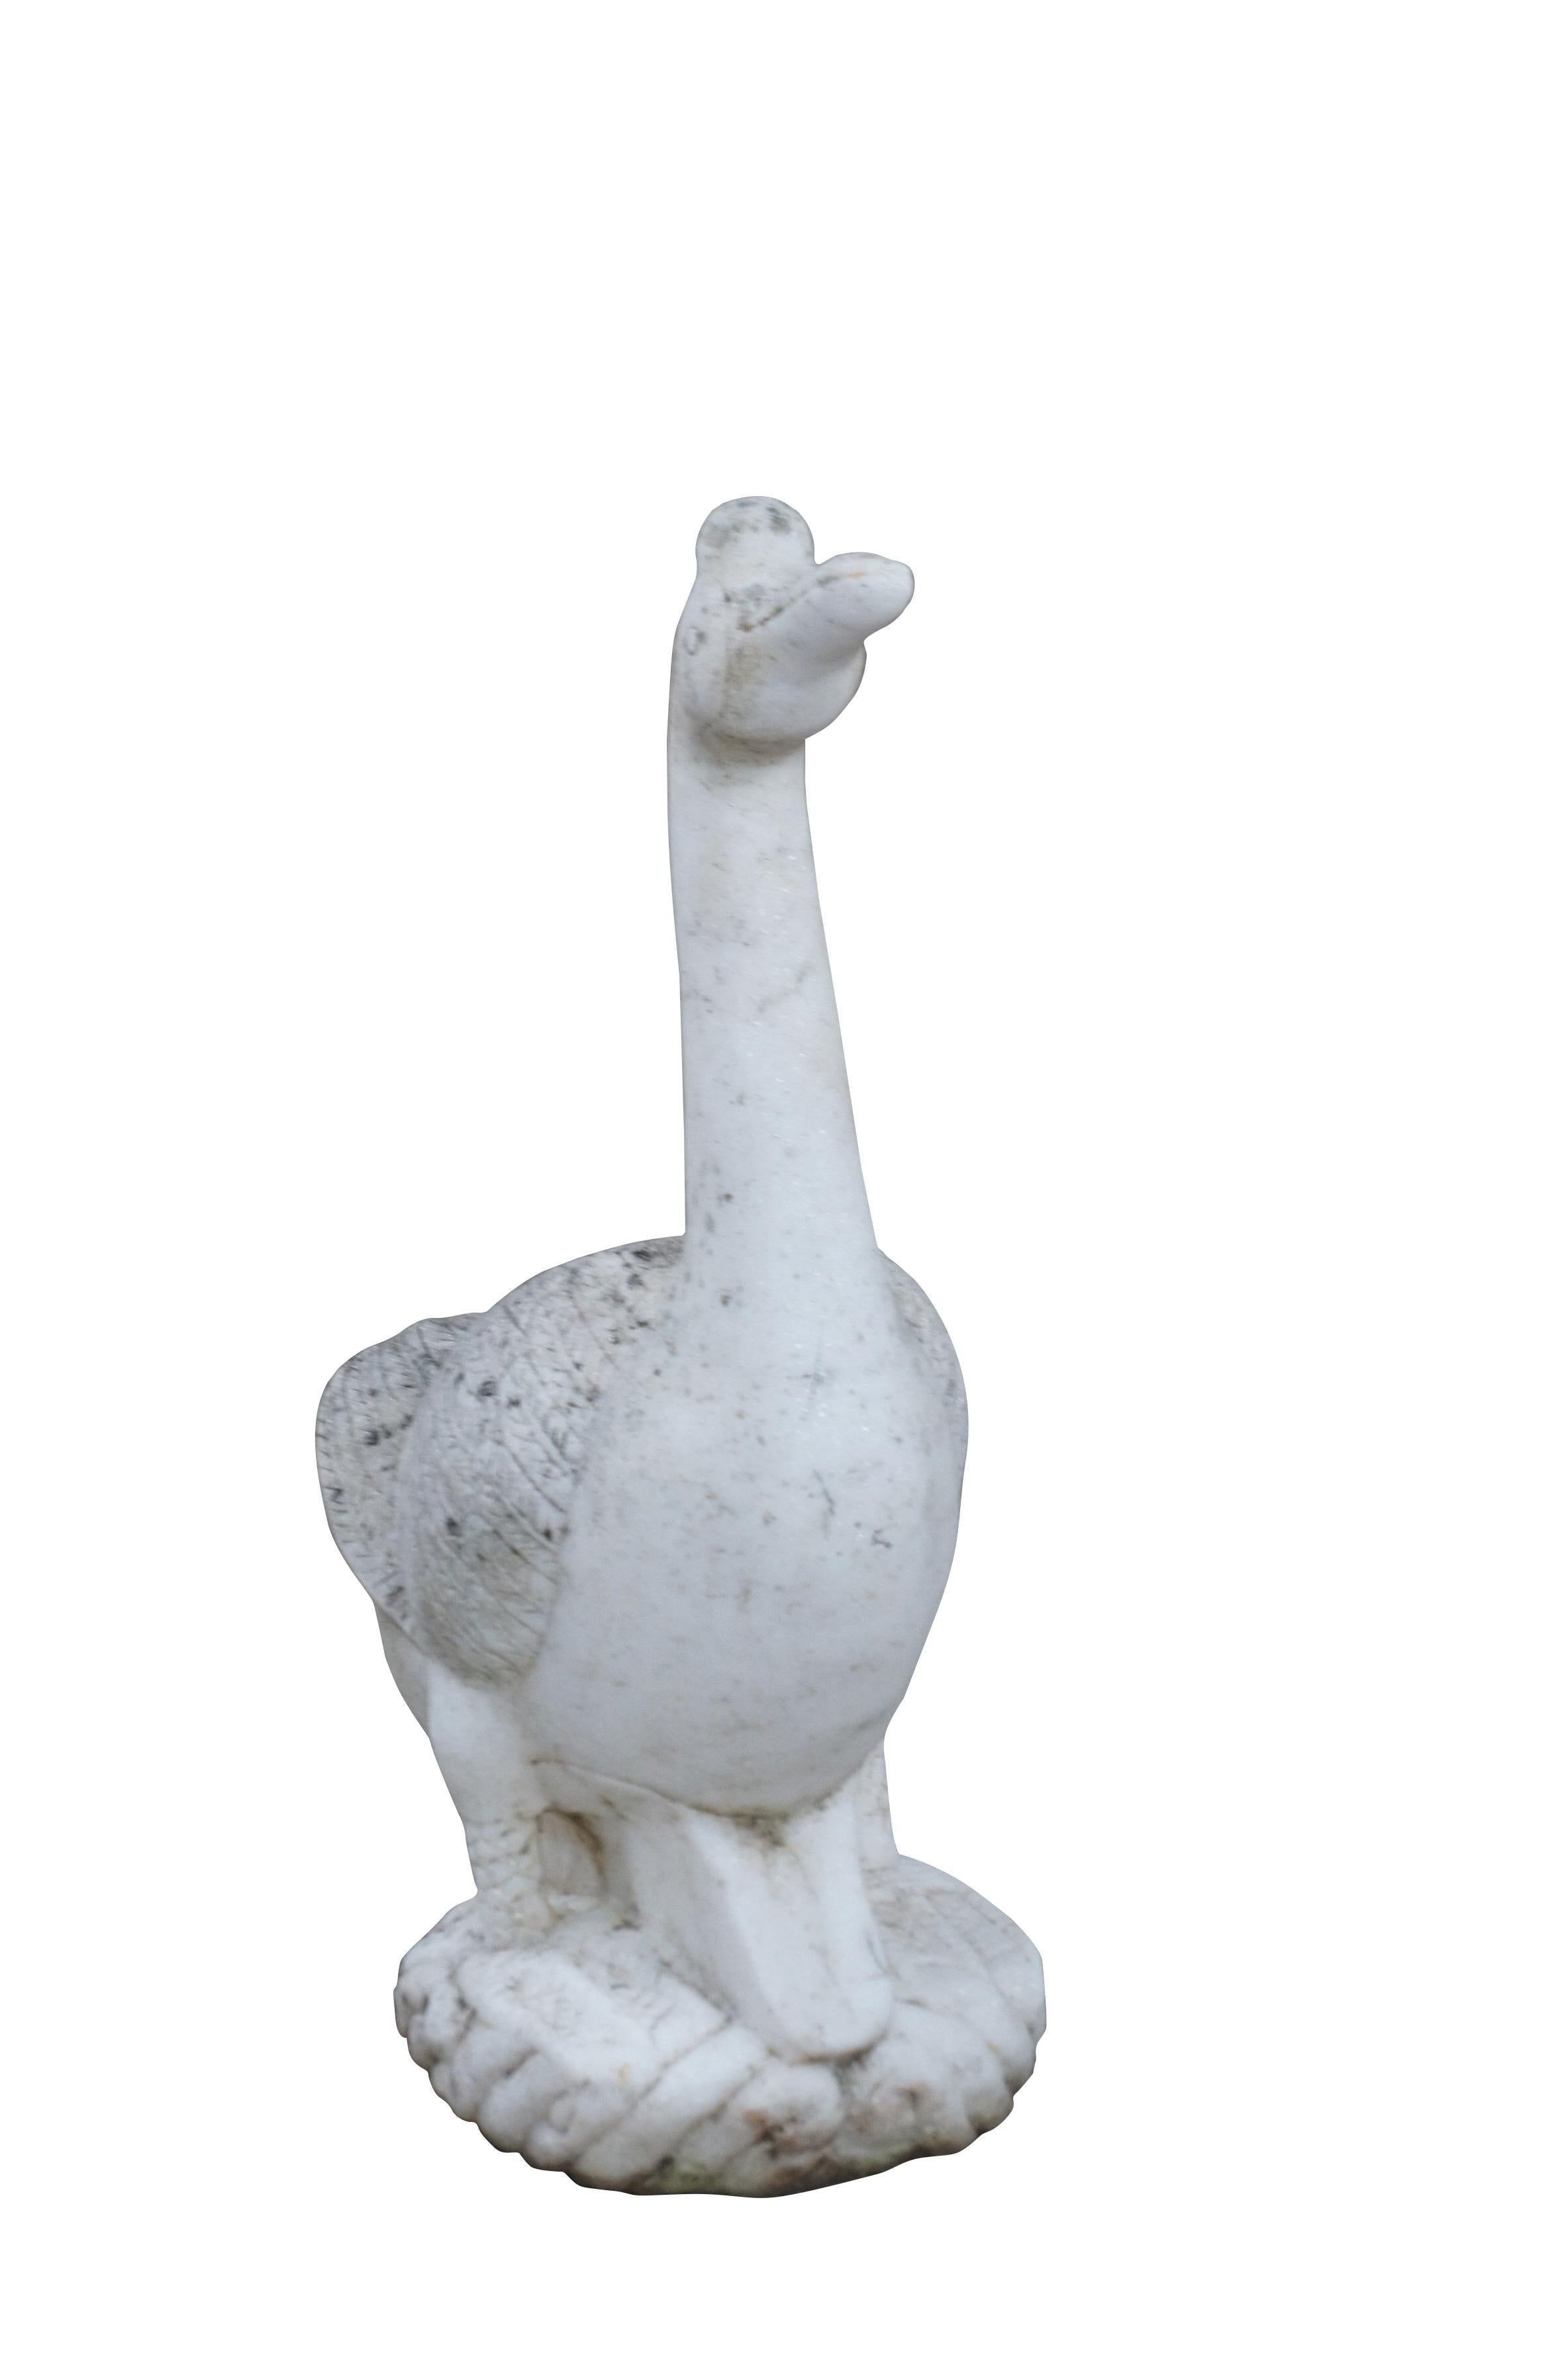 Heavy antique carved marble goose garden sculpture. Made in Italy circa 1930s.

Dimensions:
19